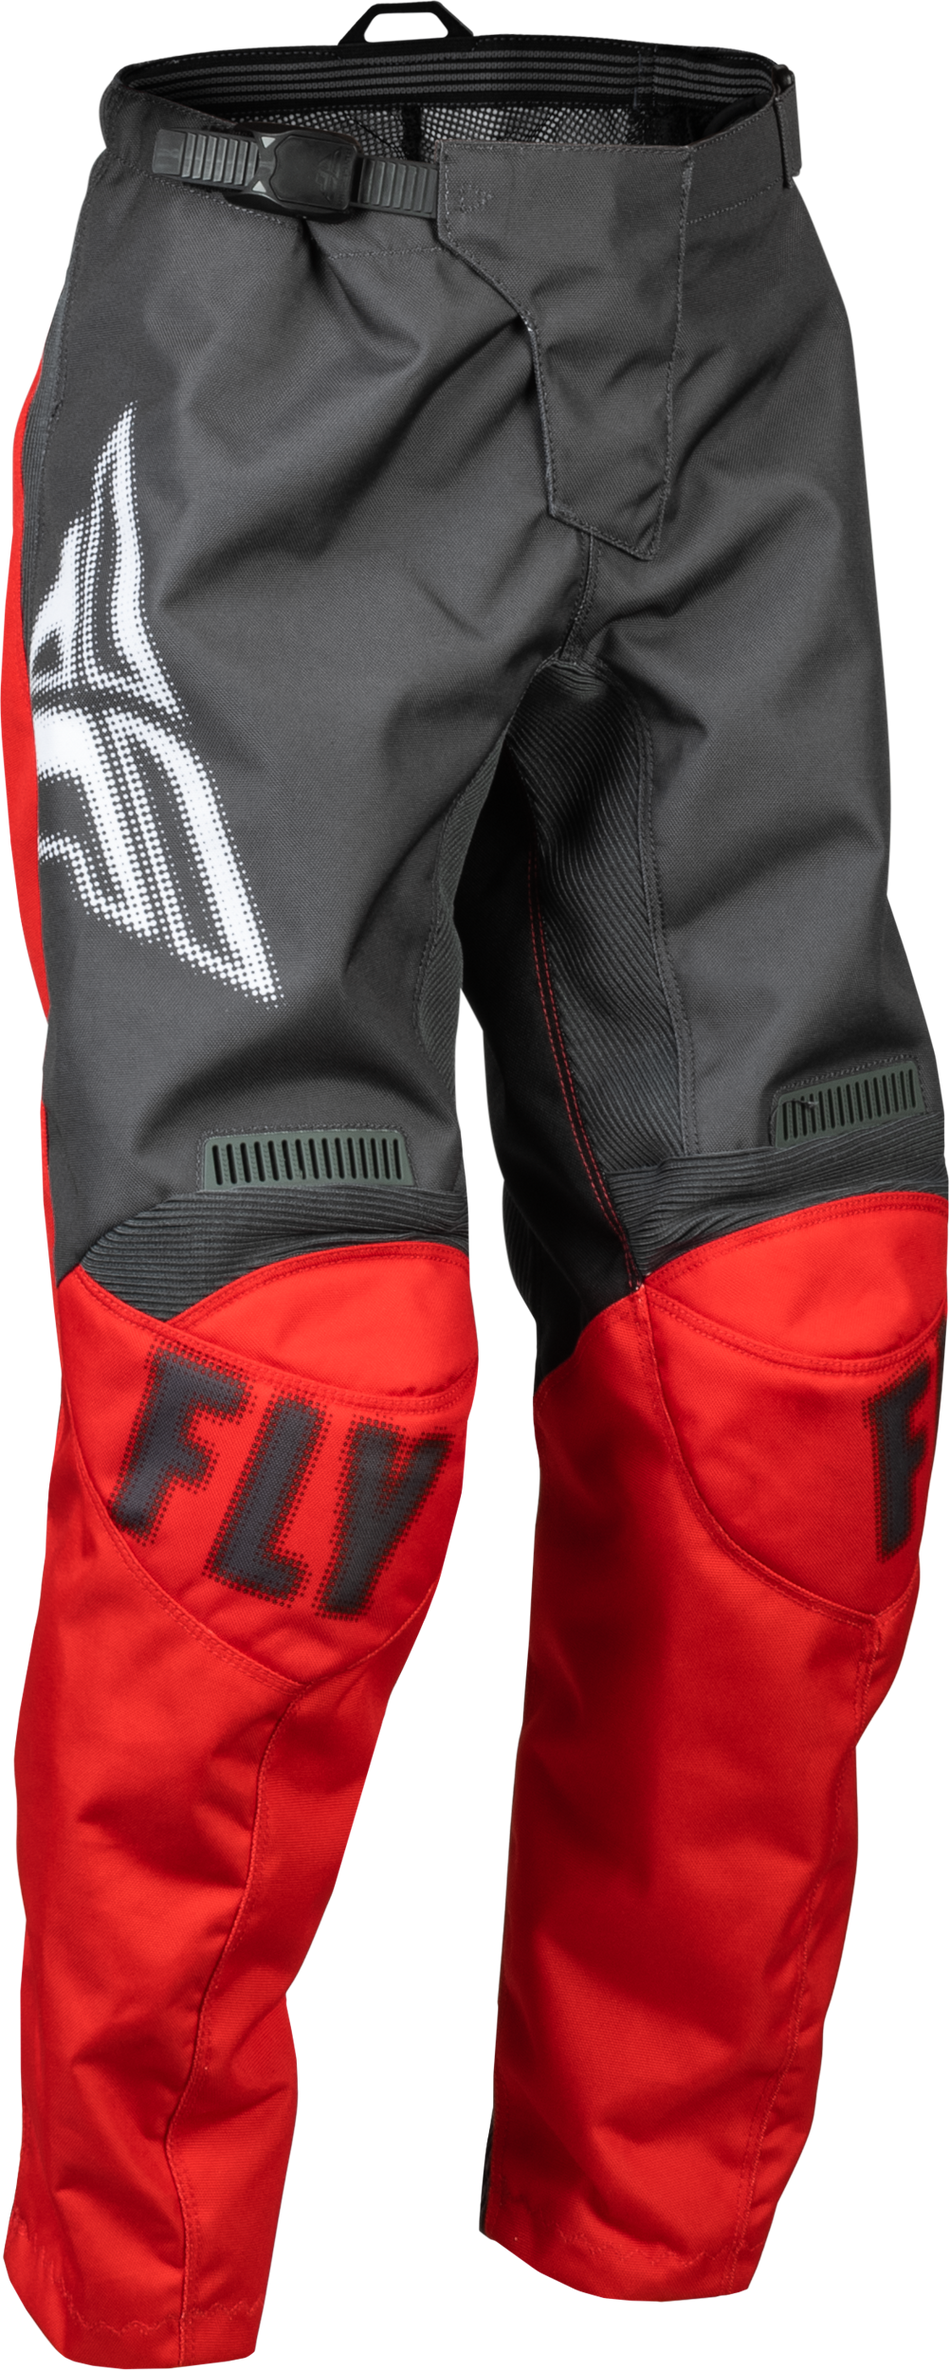 FLY RACING Youth F-16 Pants Grey/Red Sz 22 376-23422